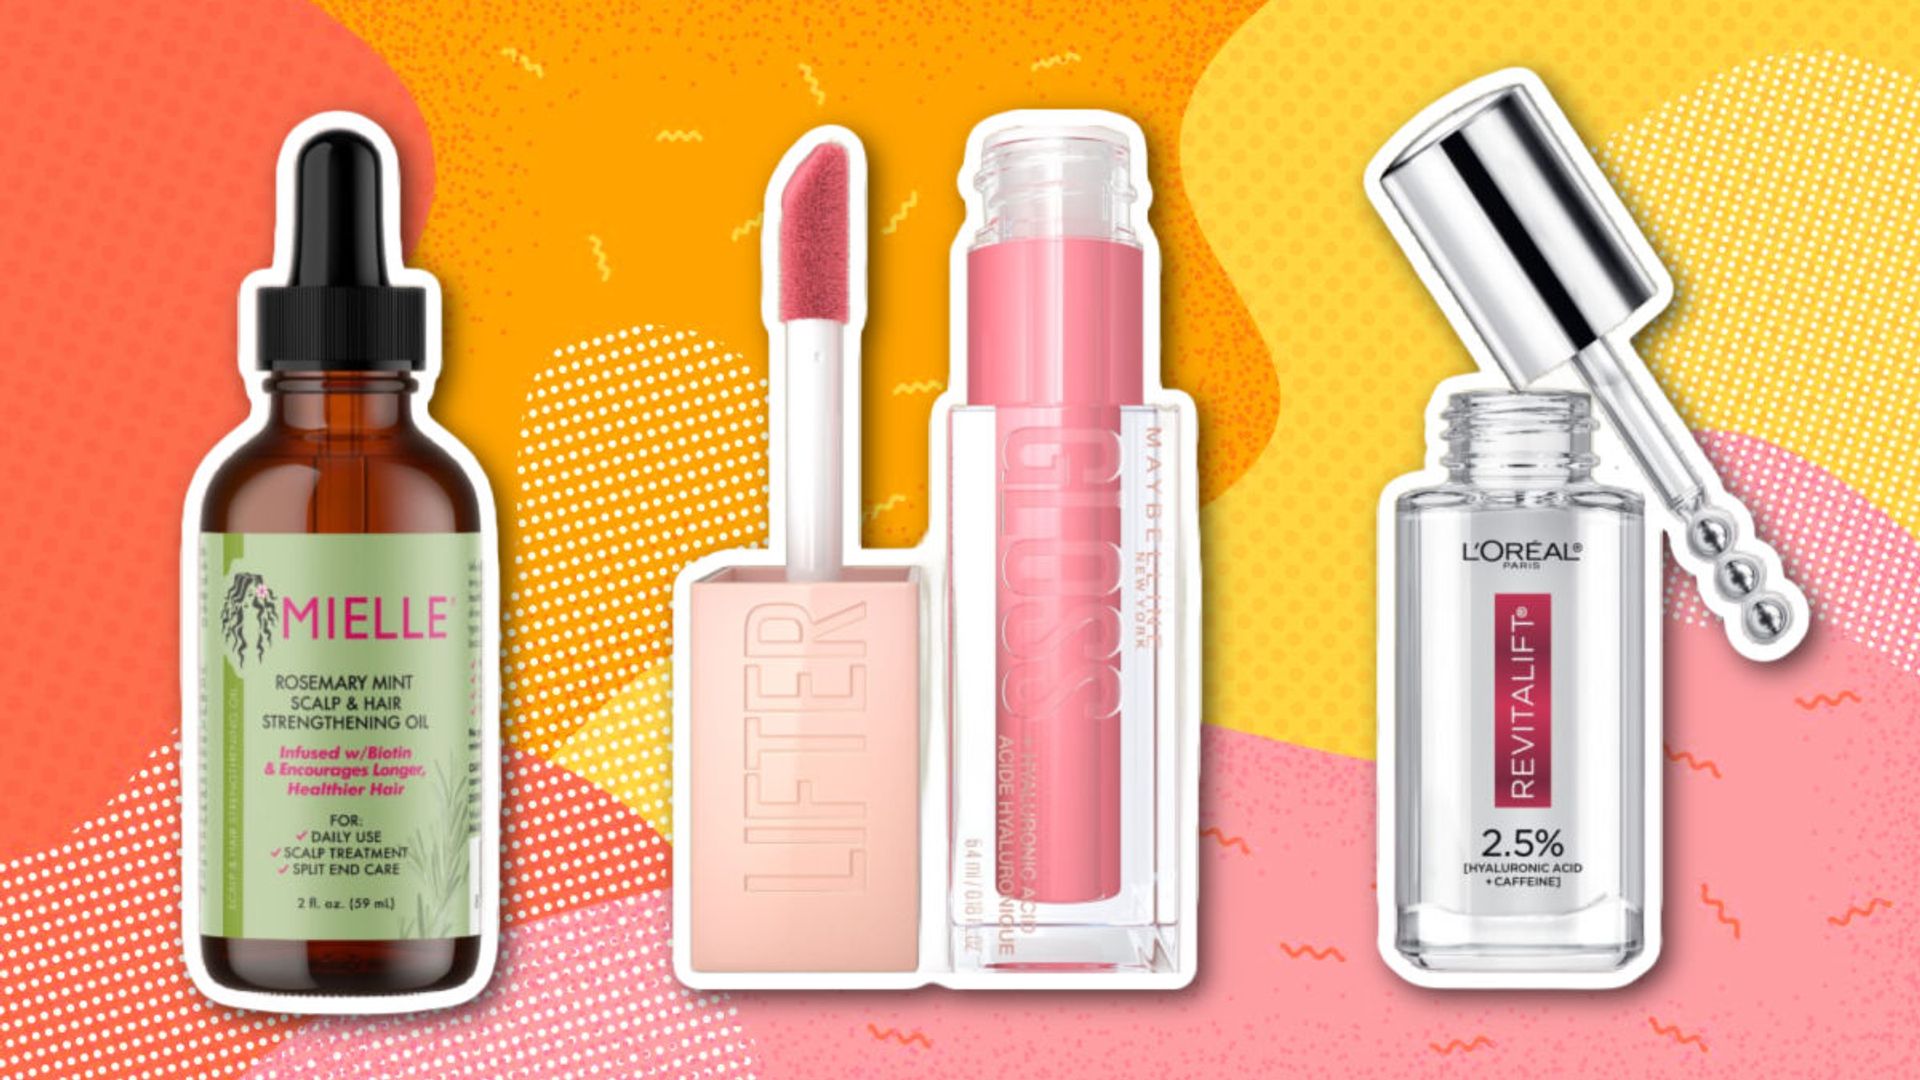 The CVS Epic Beauty Sale is here & I found deals on 5 of my most-loved beauty buys